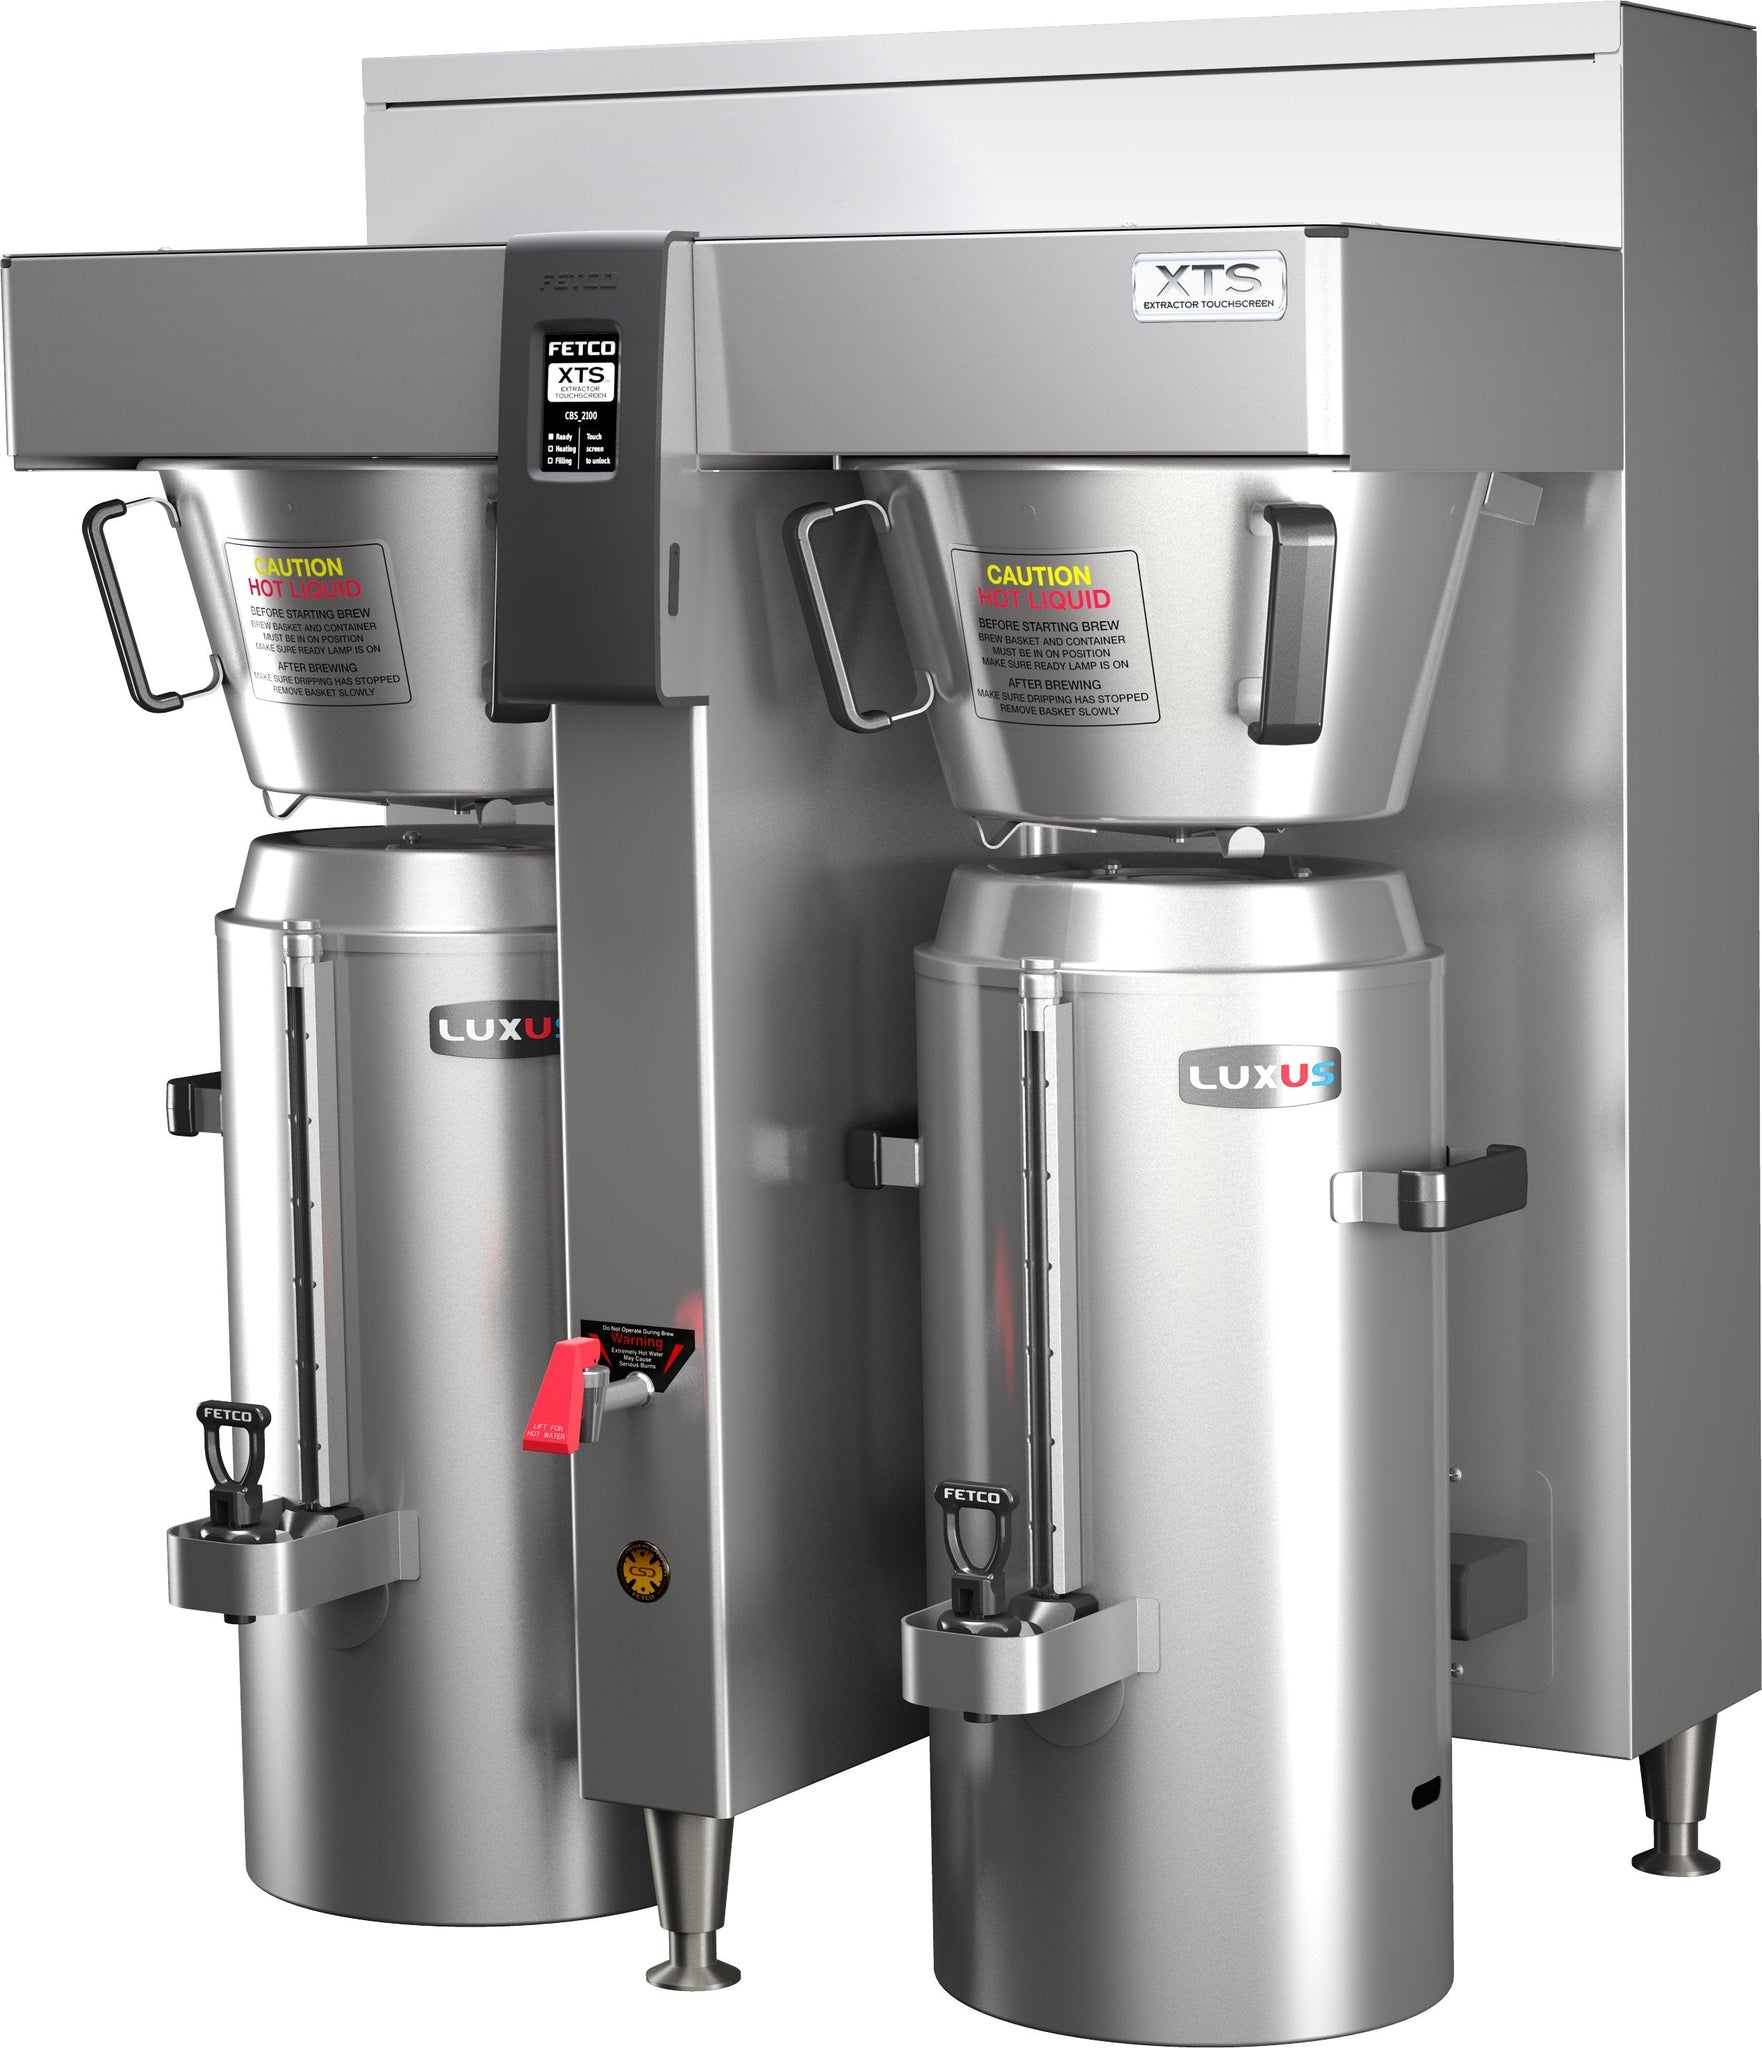 Fetco - Touchscreen Series Coffee Brewer Double Station 6 x 4 kW 200-240V - CBS-2162XTS